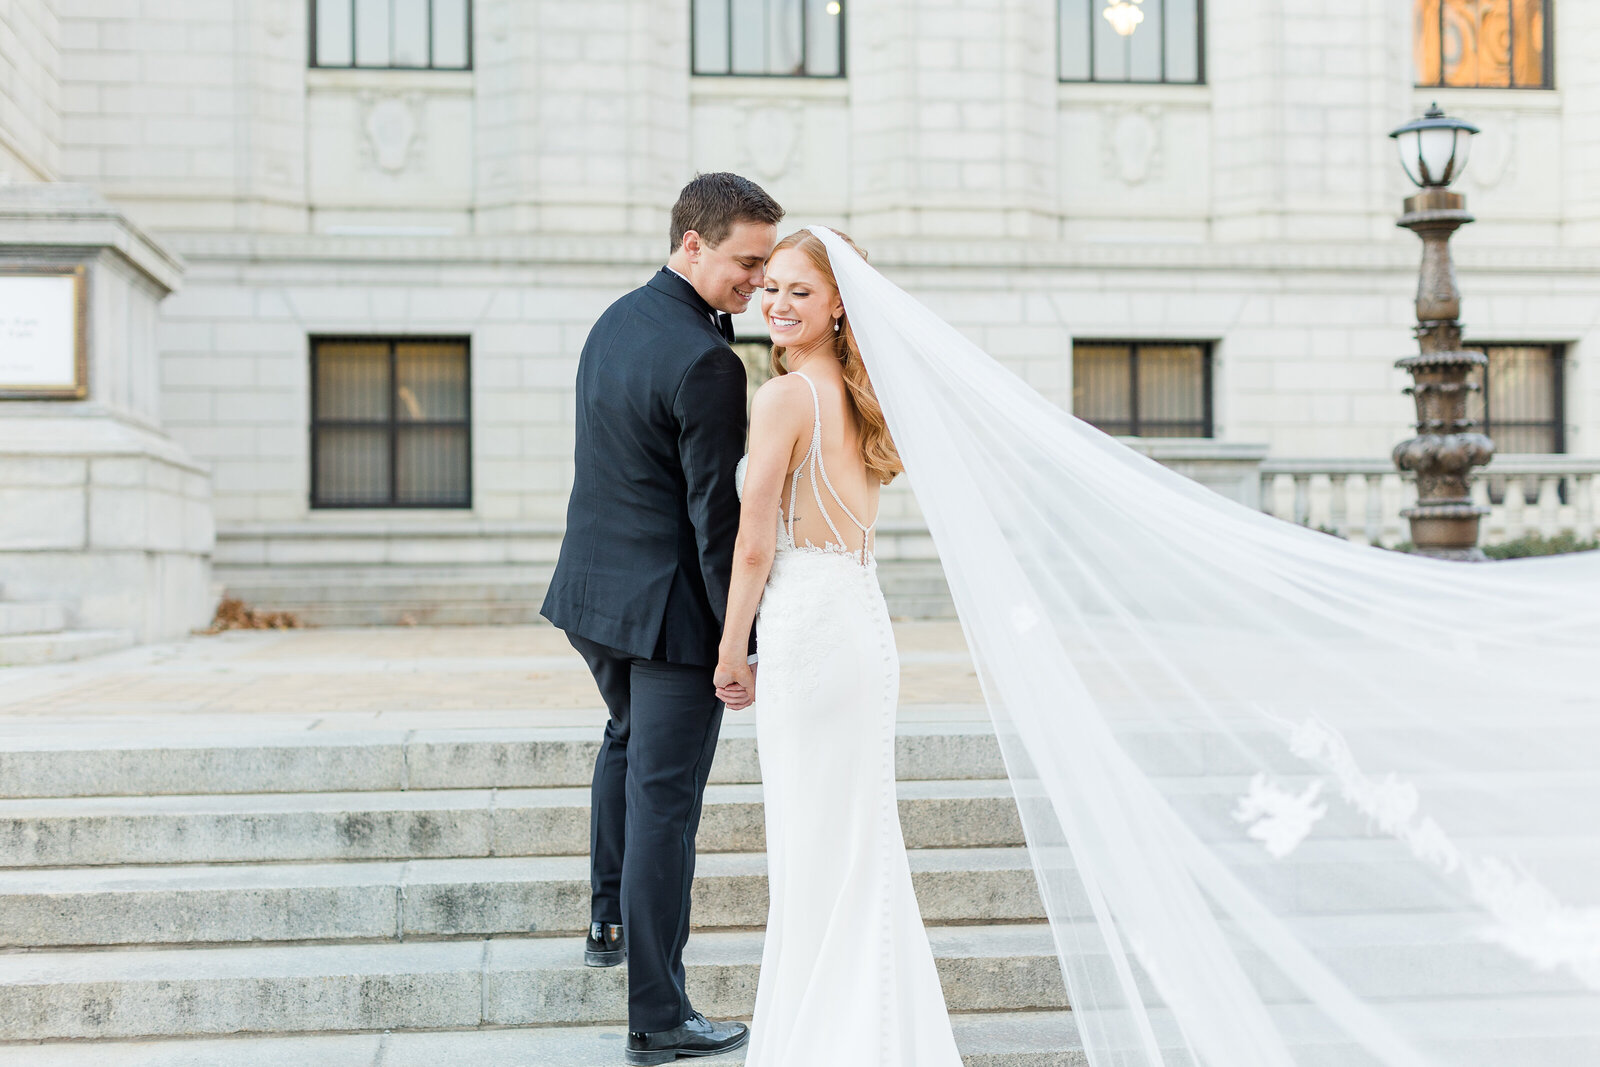 Wedding Photos in Downtown St. Louis Missouri at the St. Louis Public library